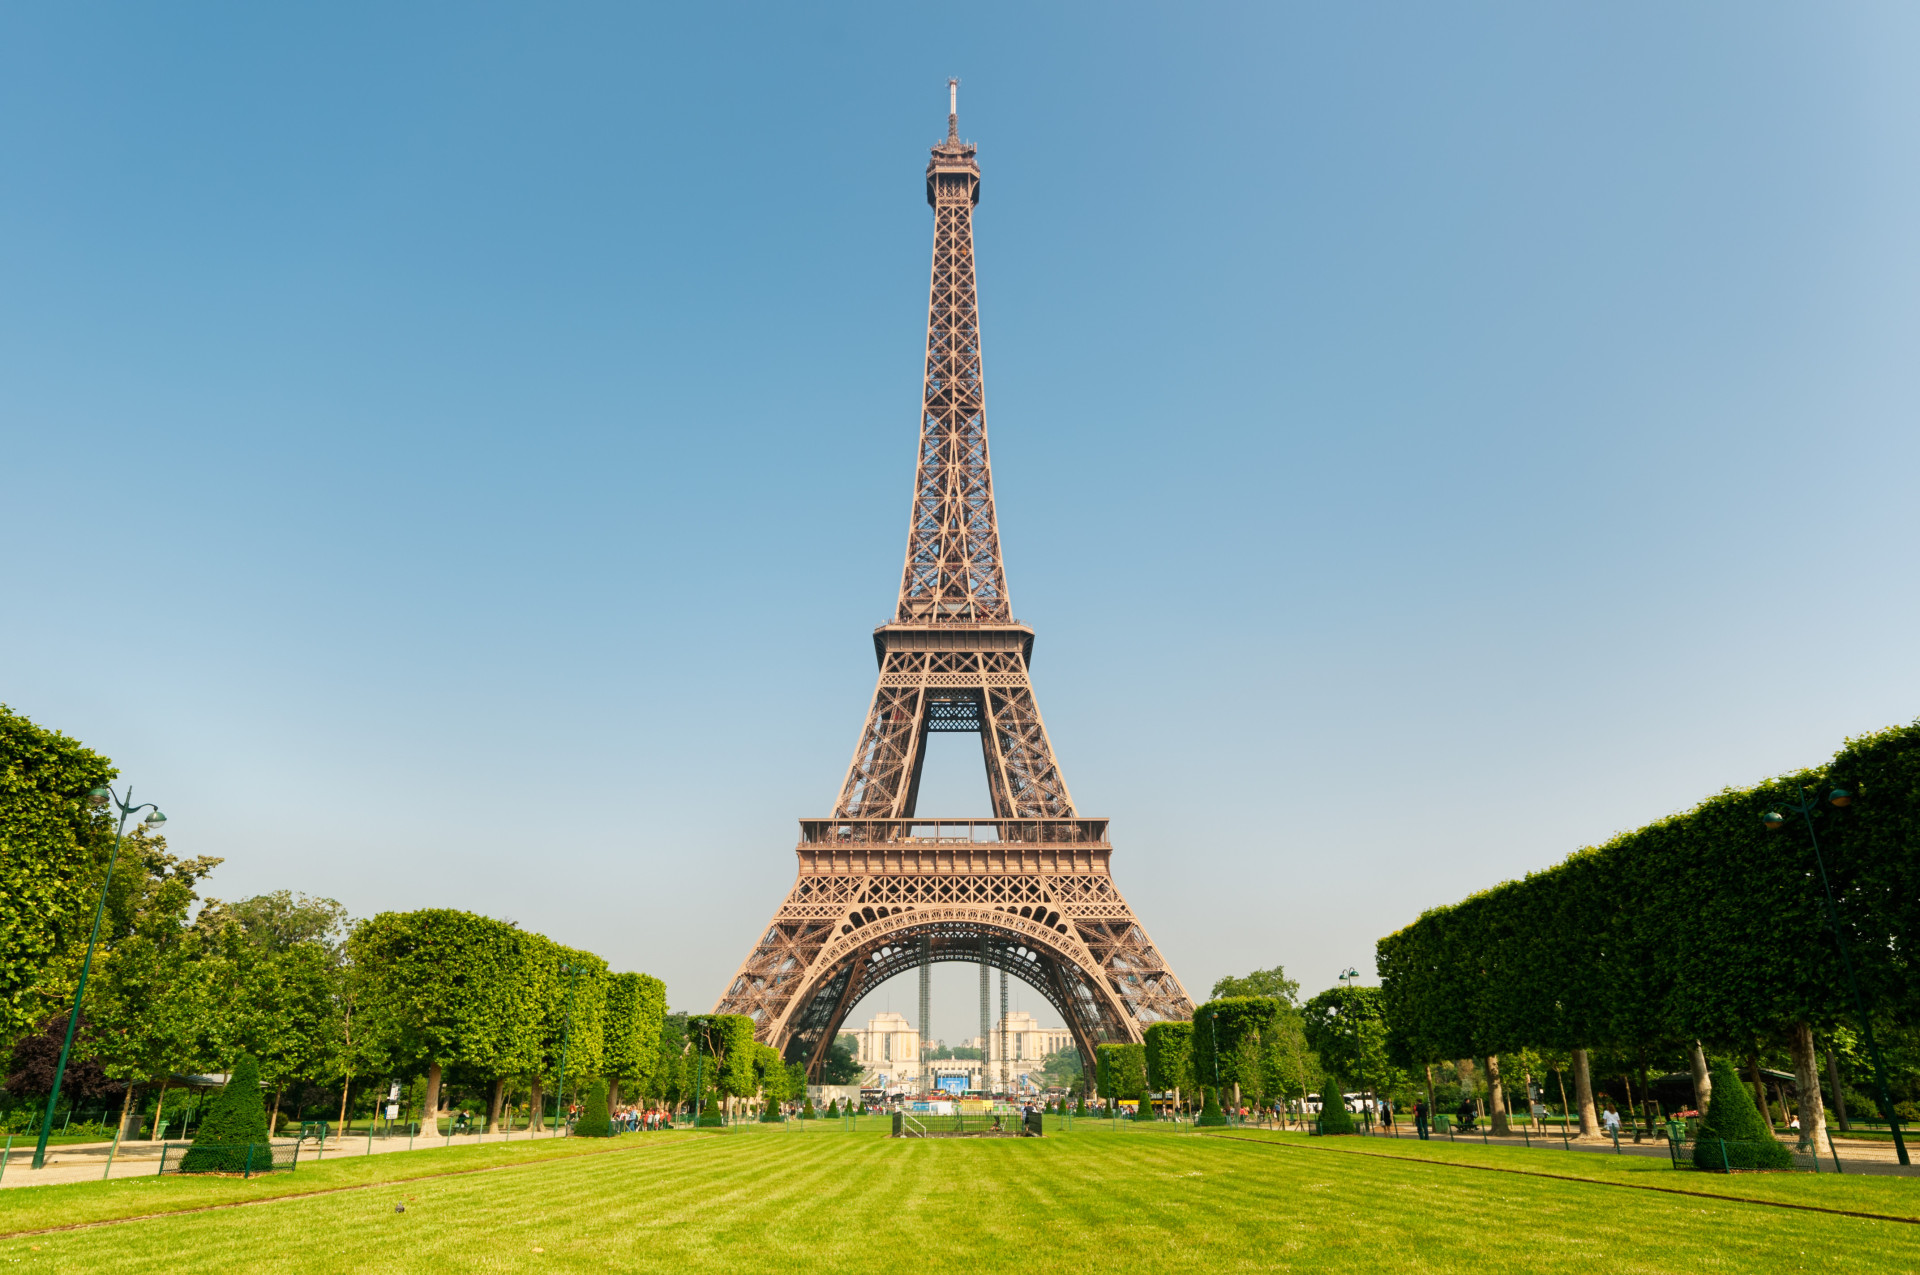 The Eiffel Tower weighs approximately 7,300 tonnes.<p><a href="https://www.msn.com/en-us/community/channel/vid-7xx8mnucu55yw63we9va2gwr7uihbxwc68fxqp25x6tg4ftibpra?cvid=94631541bc0f4f89bfd59158d696ad7e">Follow us and access great exclusive content every day</a></p>